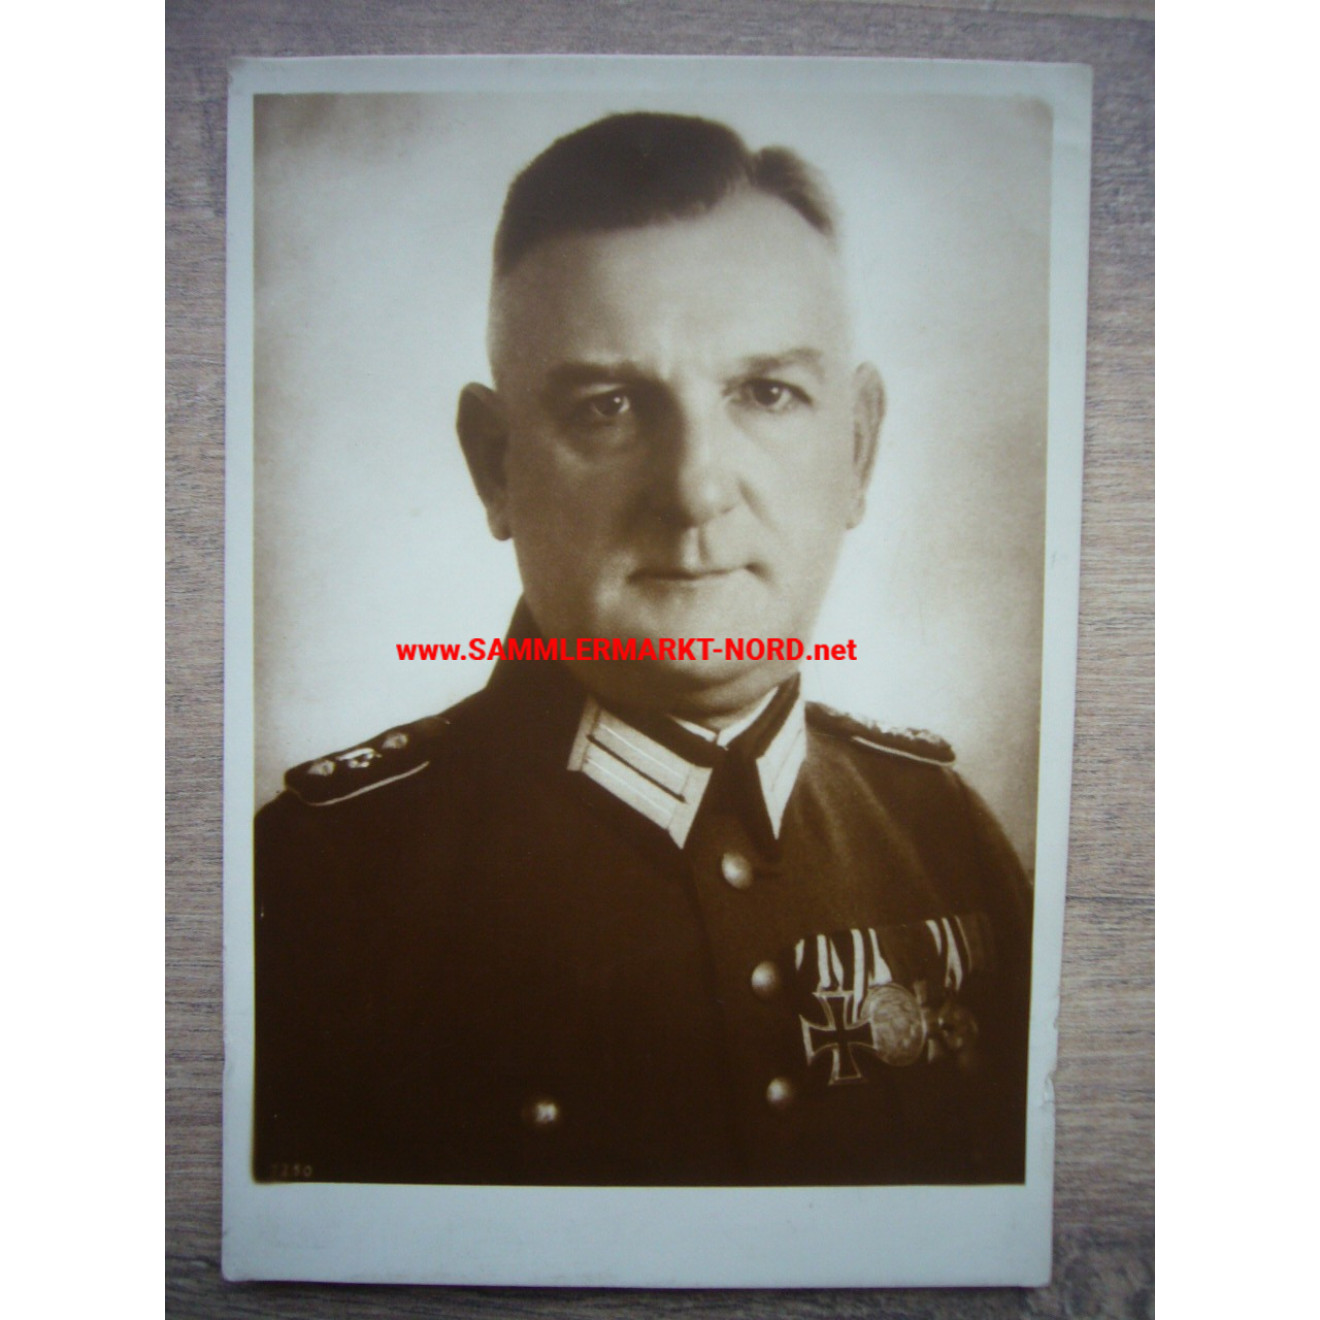 Weimar Republic - Police officer with medal clasp